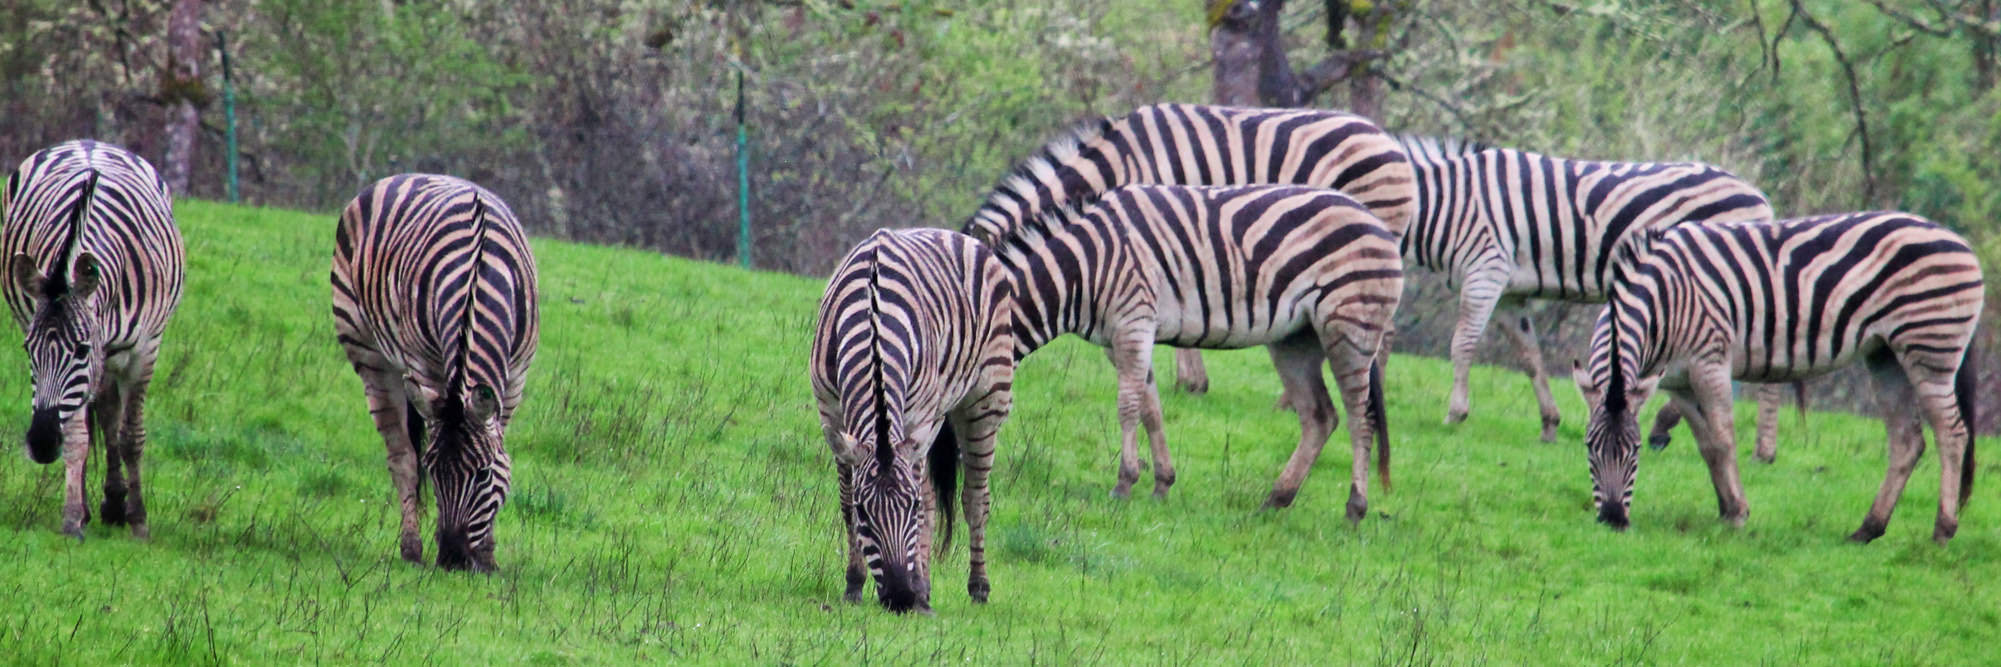 A a group of zebras grazing